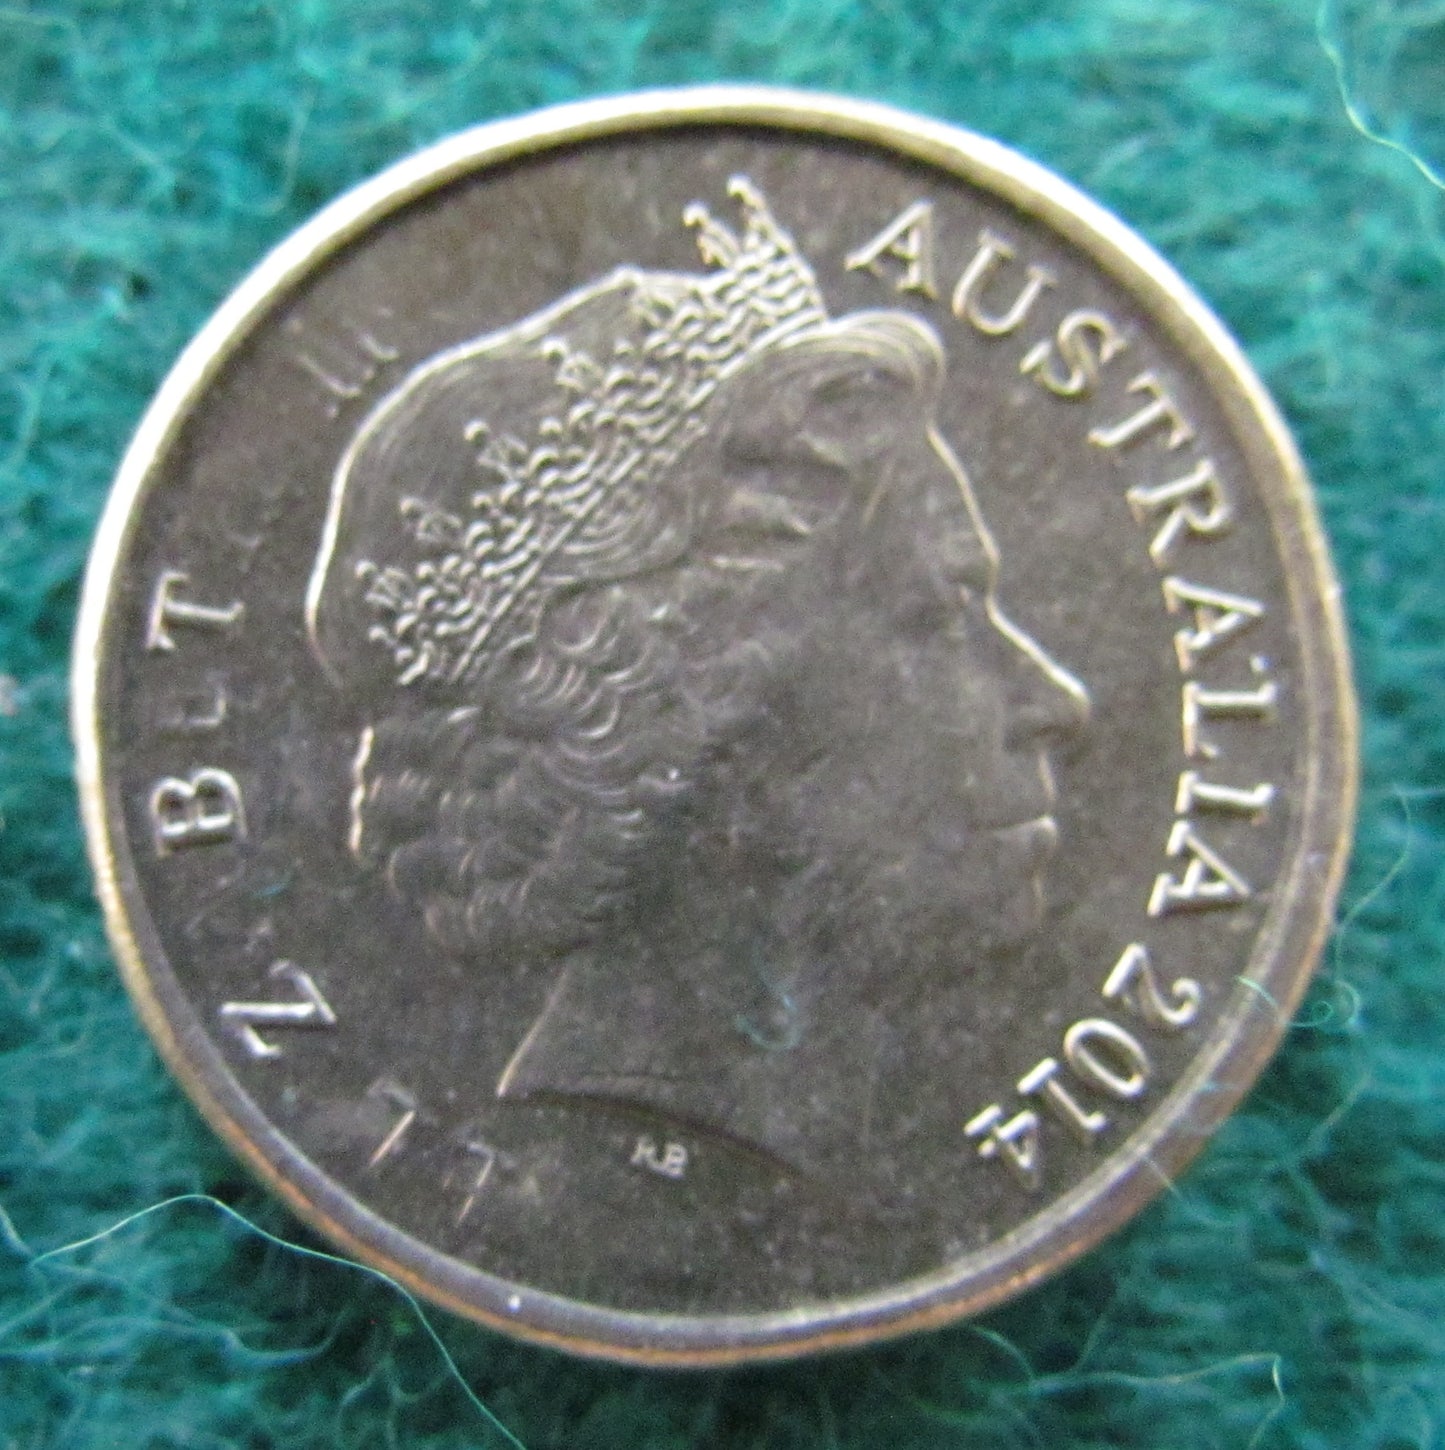 Australian 2014 2 Dollar Remembrance Queen Elizabeth Coin - Circulated Variety